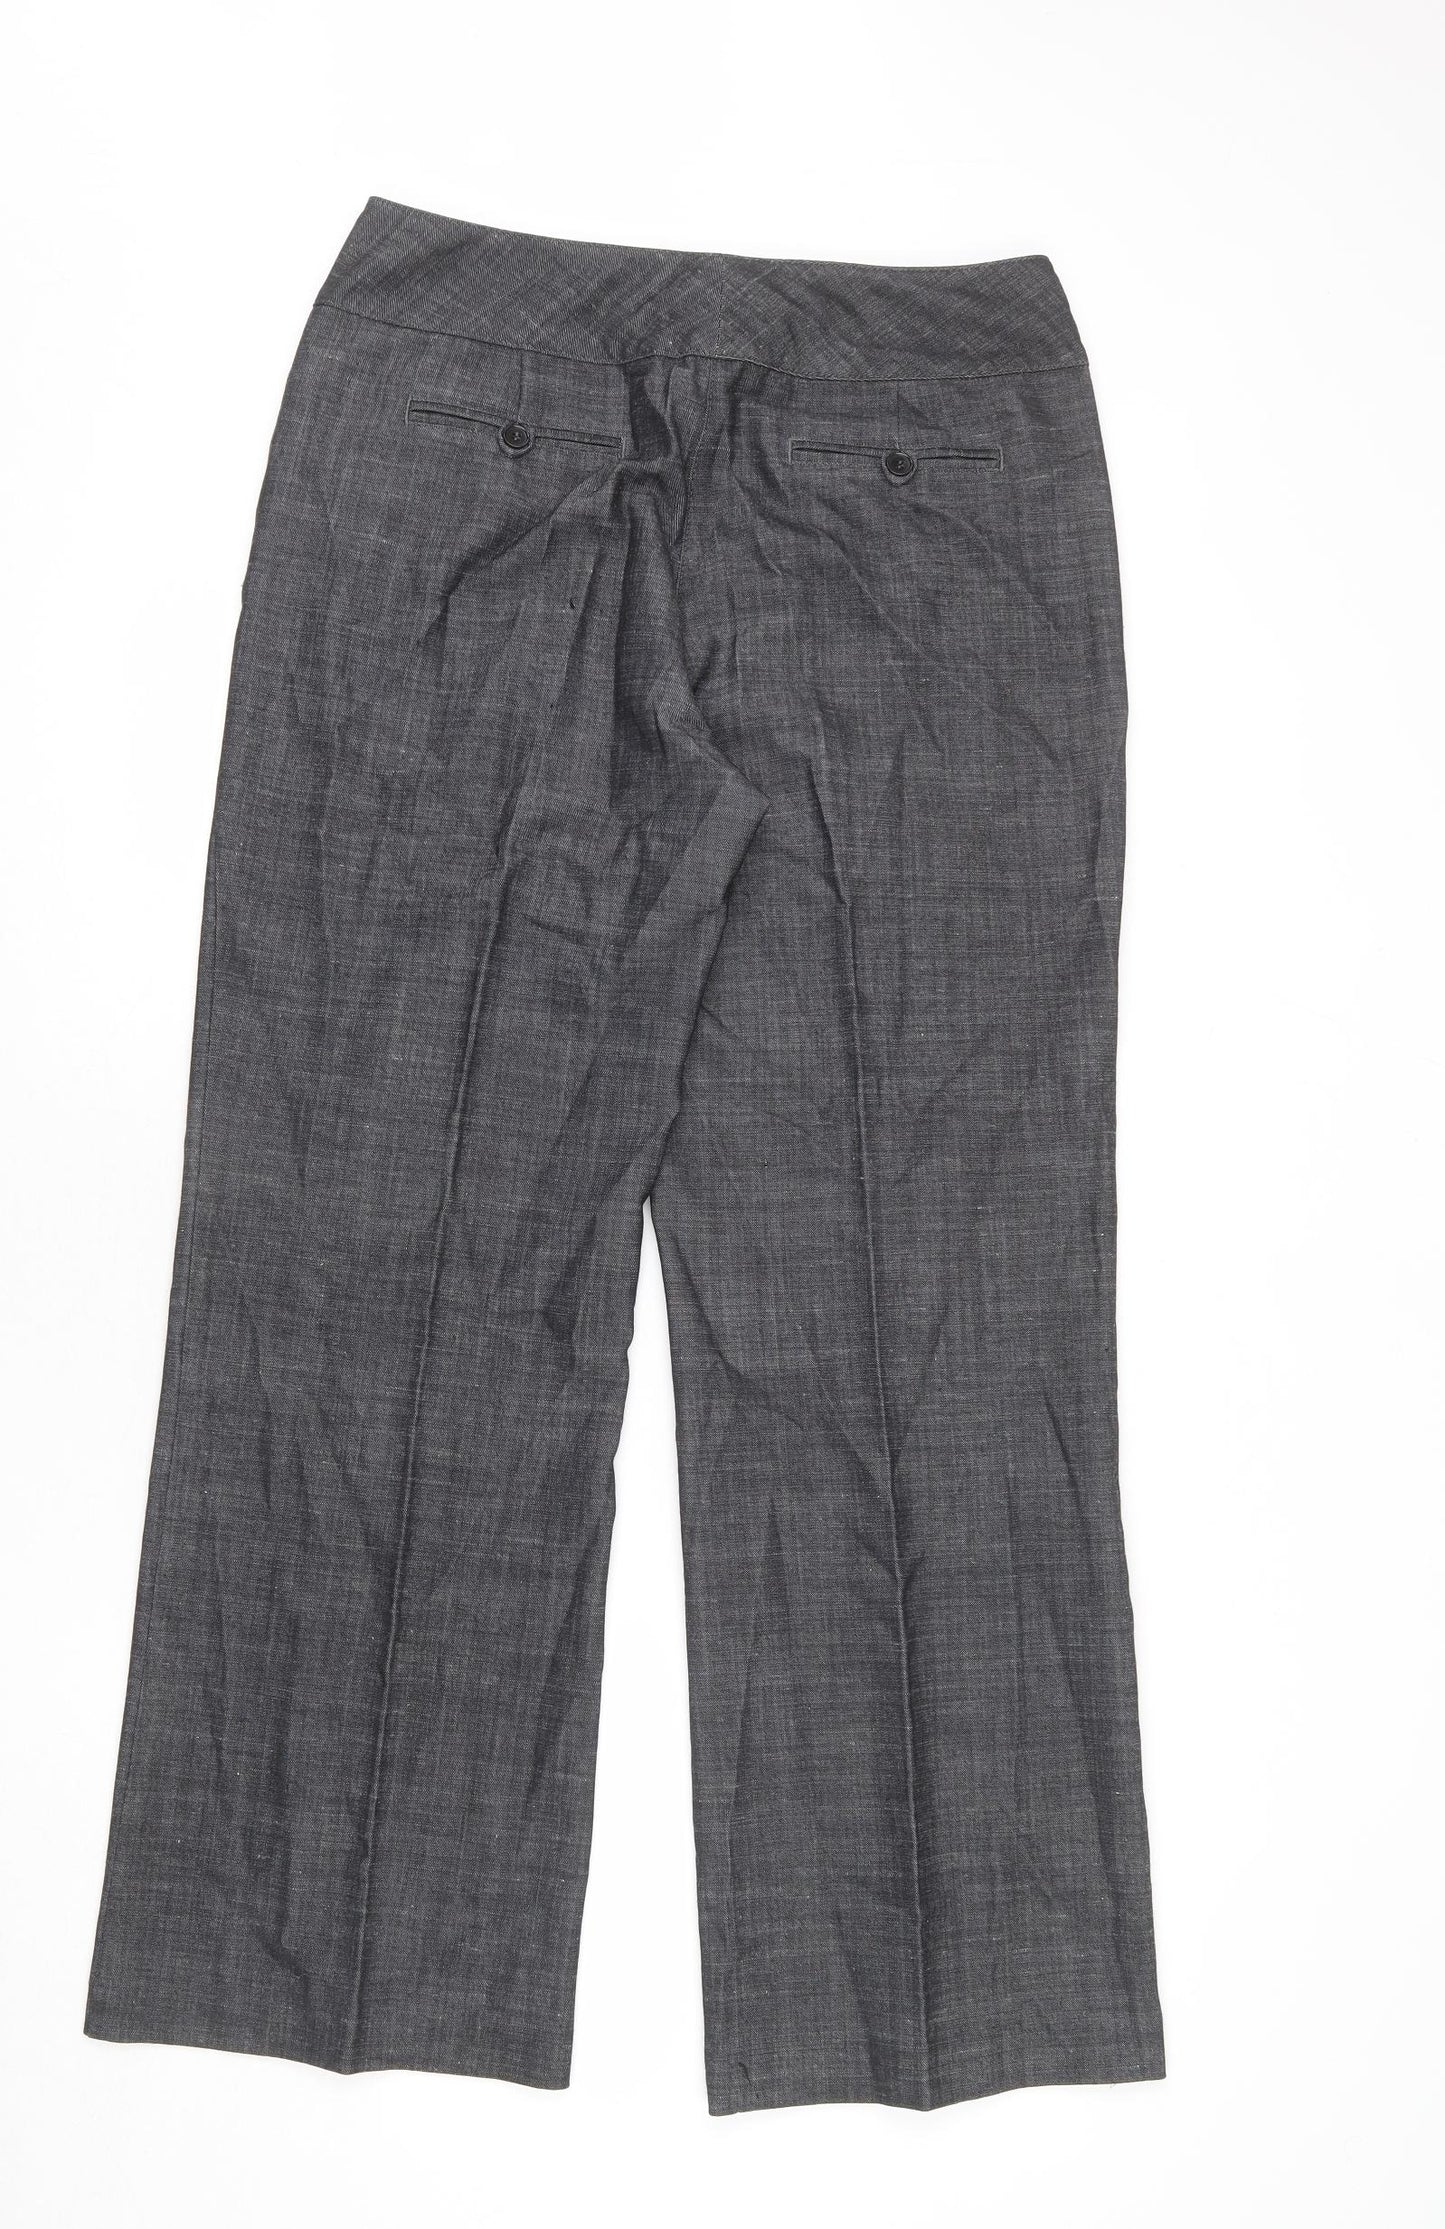 Monsoon Womens Grey Polyester Dress Pants Trousers Size 14 L30 in Regular Button